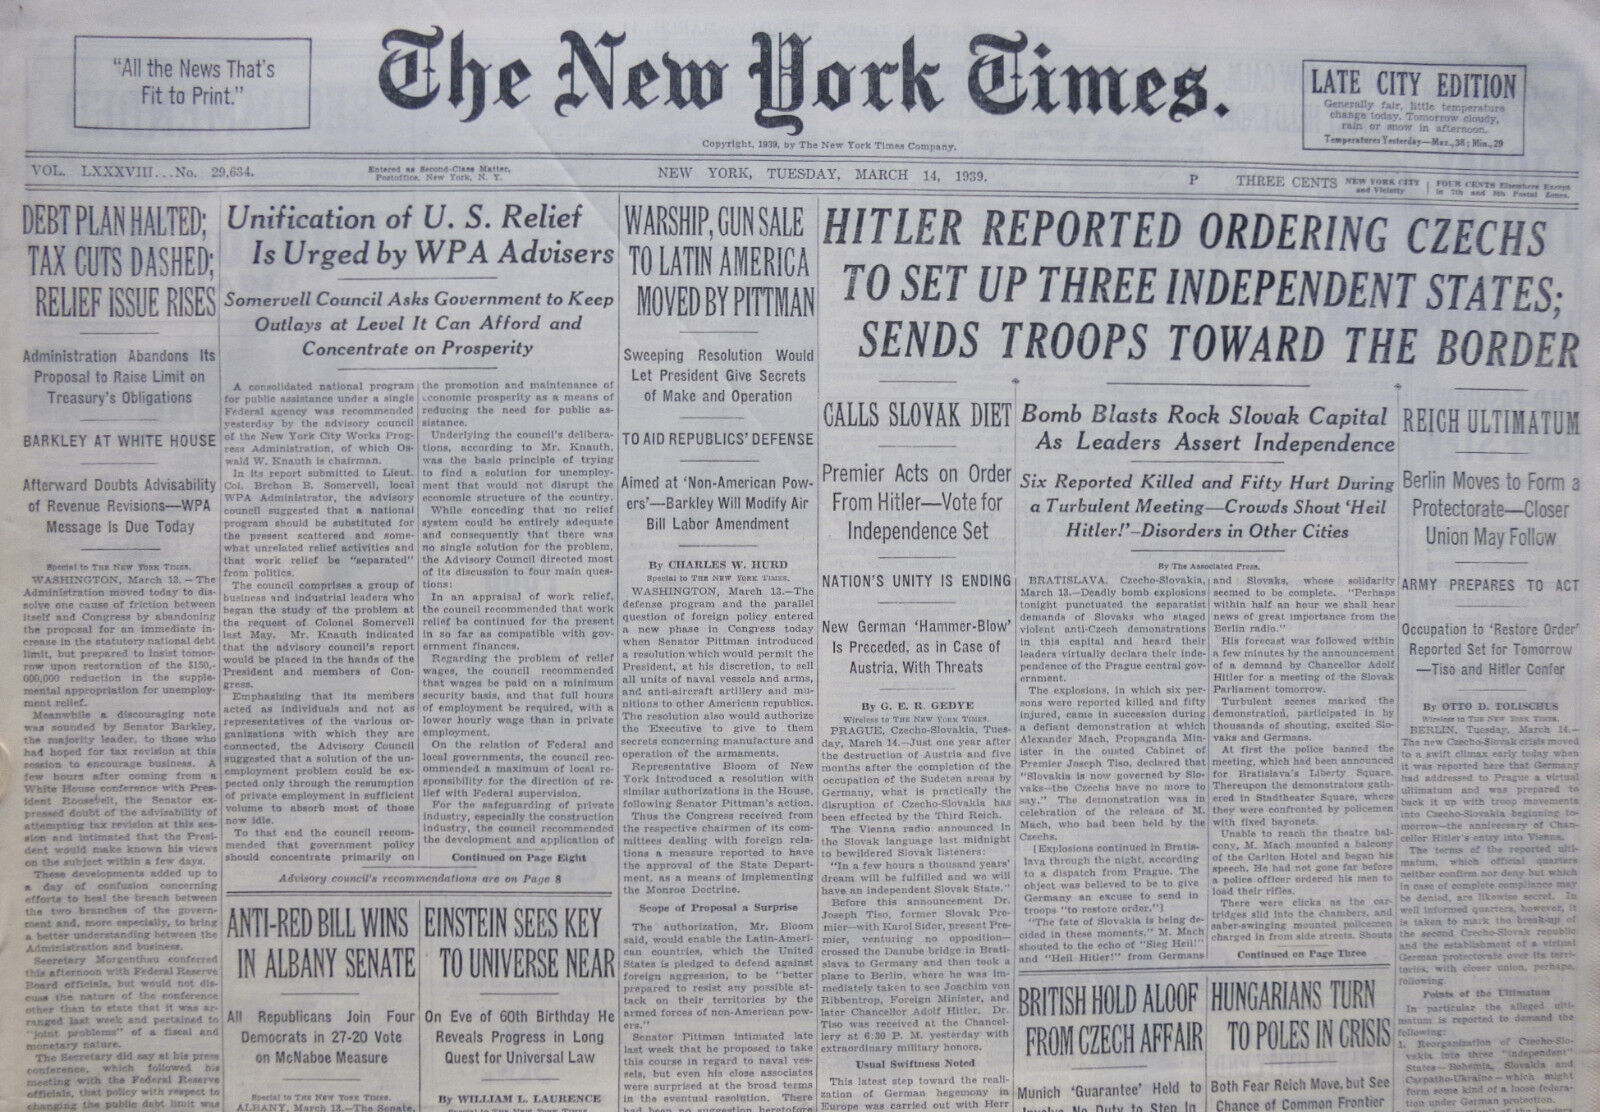 3-1939 WWII March 14 HITLER REPORTED ORDERING CZECHS TO SET UP THREE INDEPENDENT